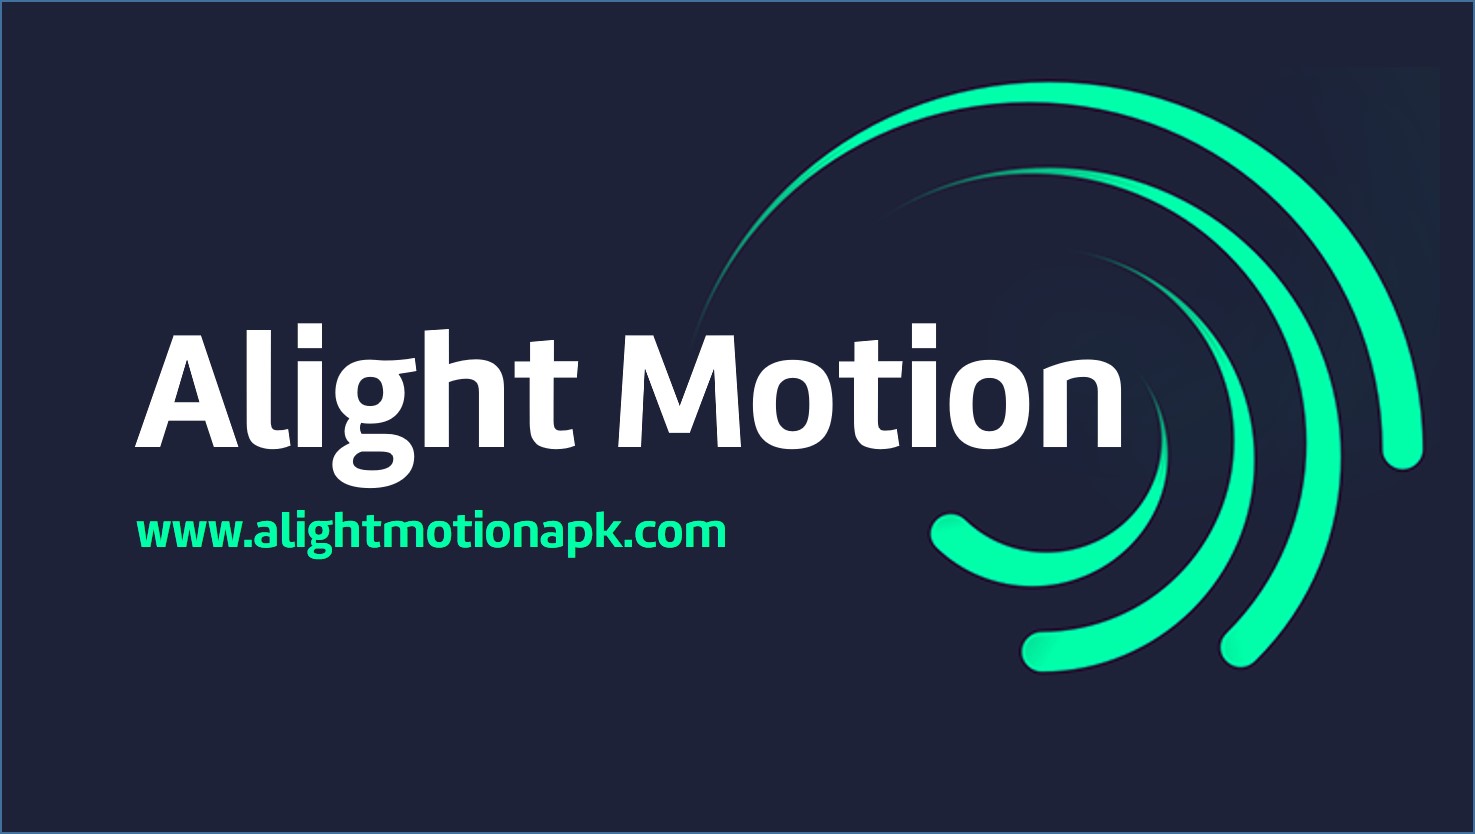 Alight Motion APK 4.2.3 Latest version free Download Android, iOS, PC